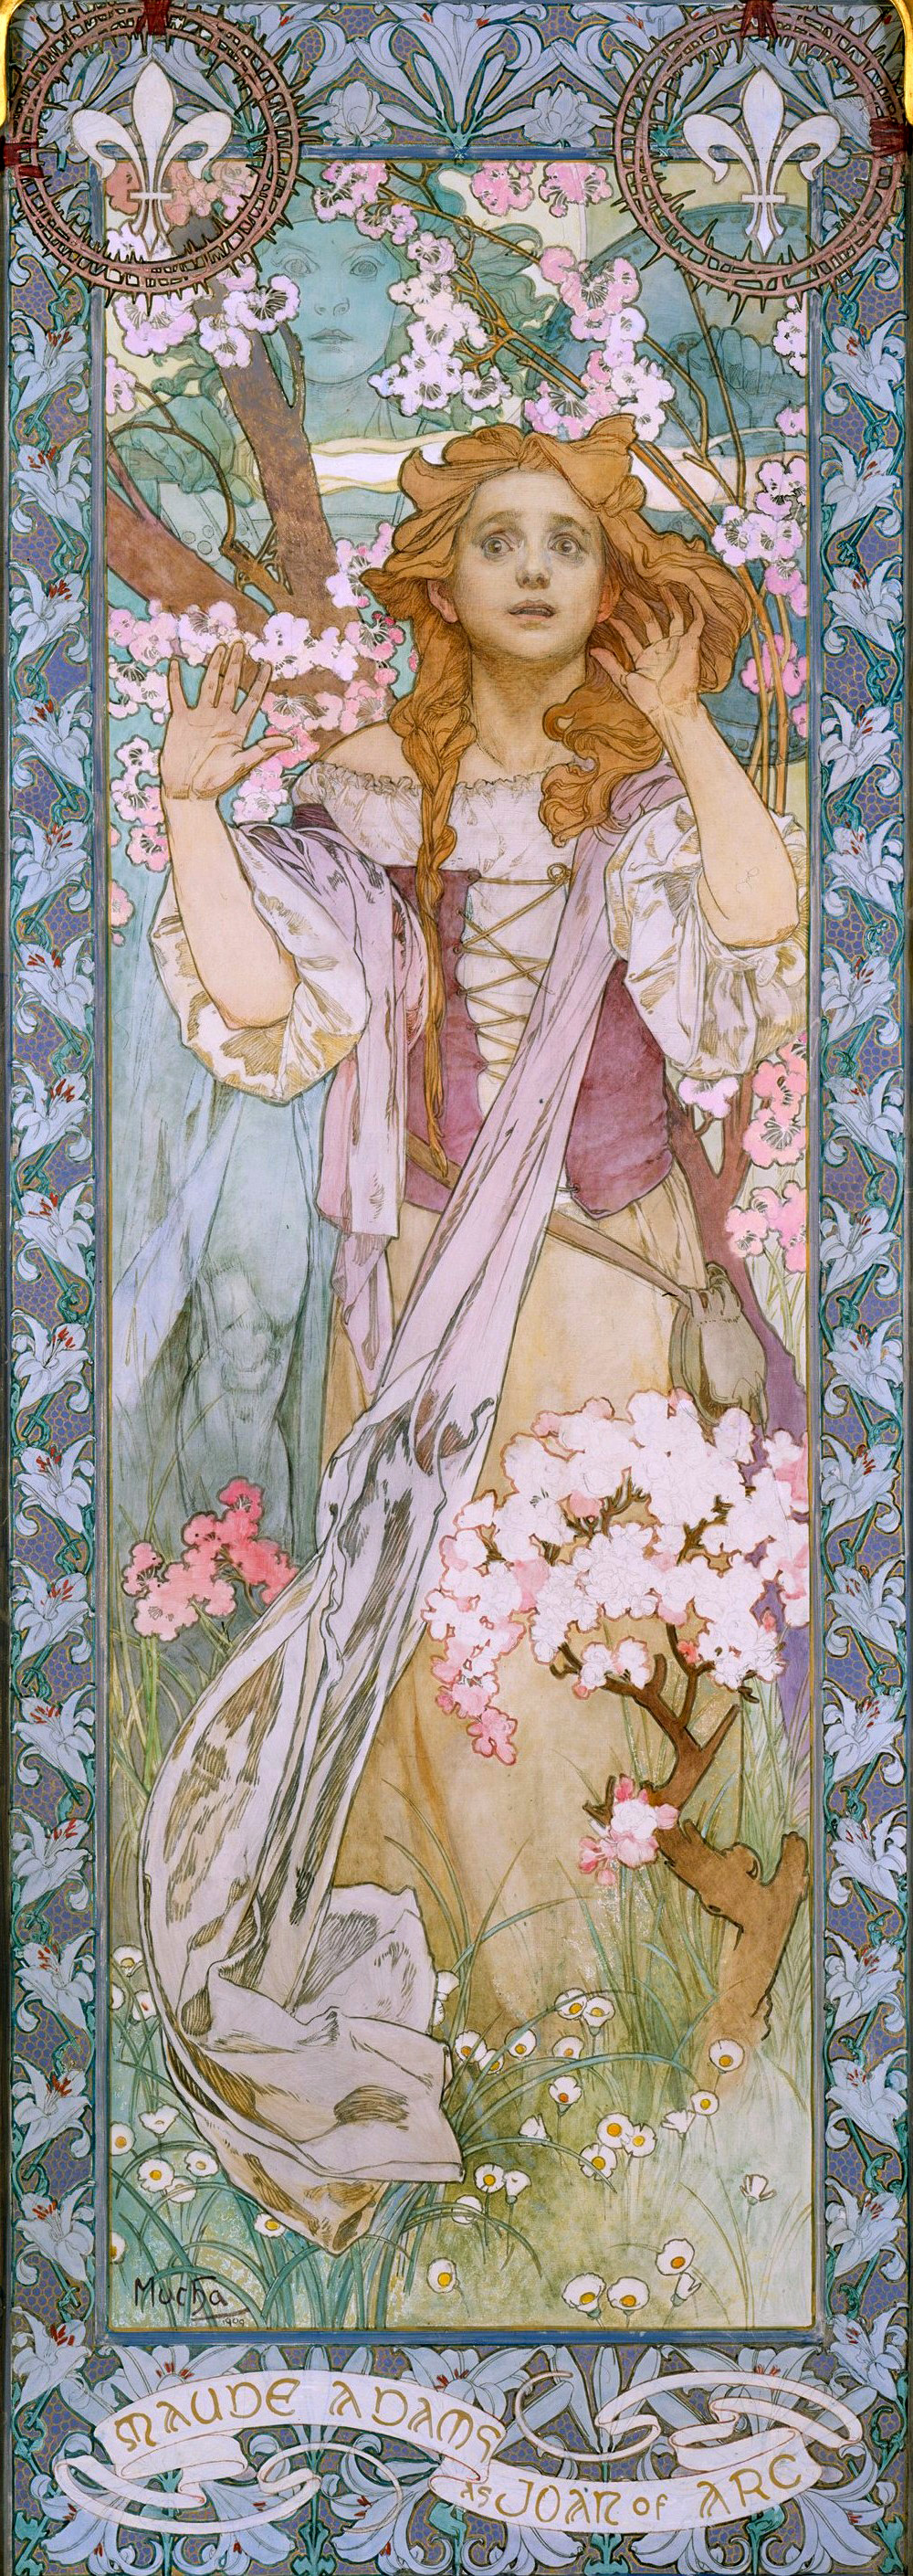 A flowery, intricate, embellished painting of a woman in idealized medieval dress, with text reading “Maude Adams as Joan of Arc”